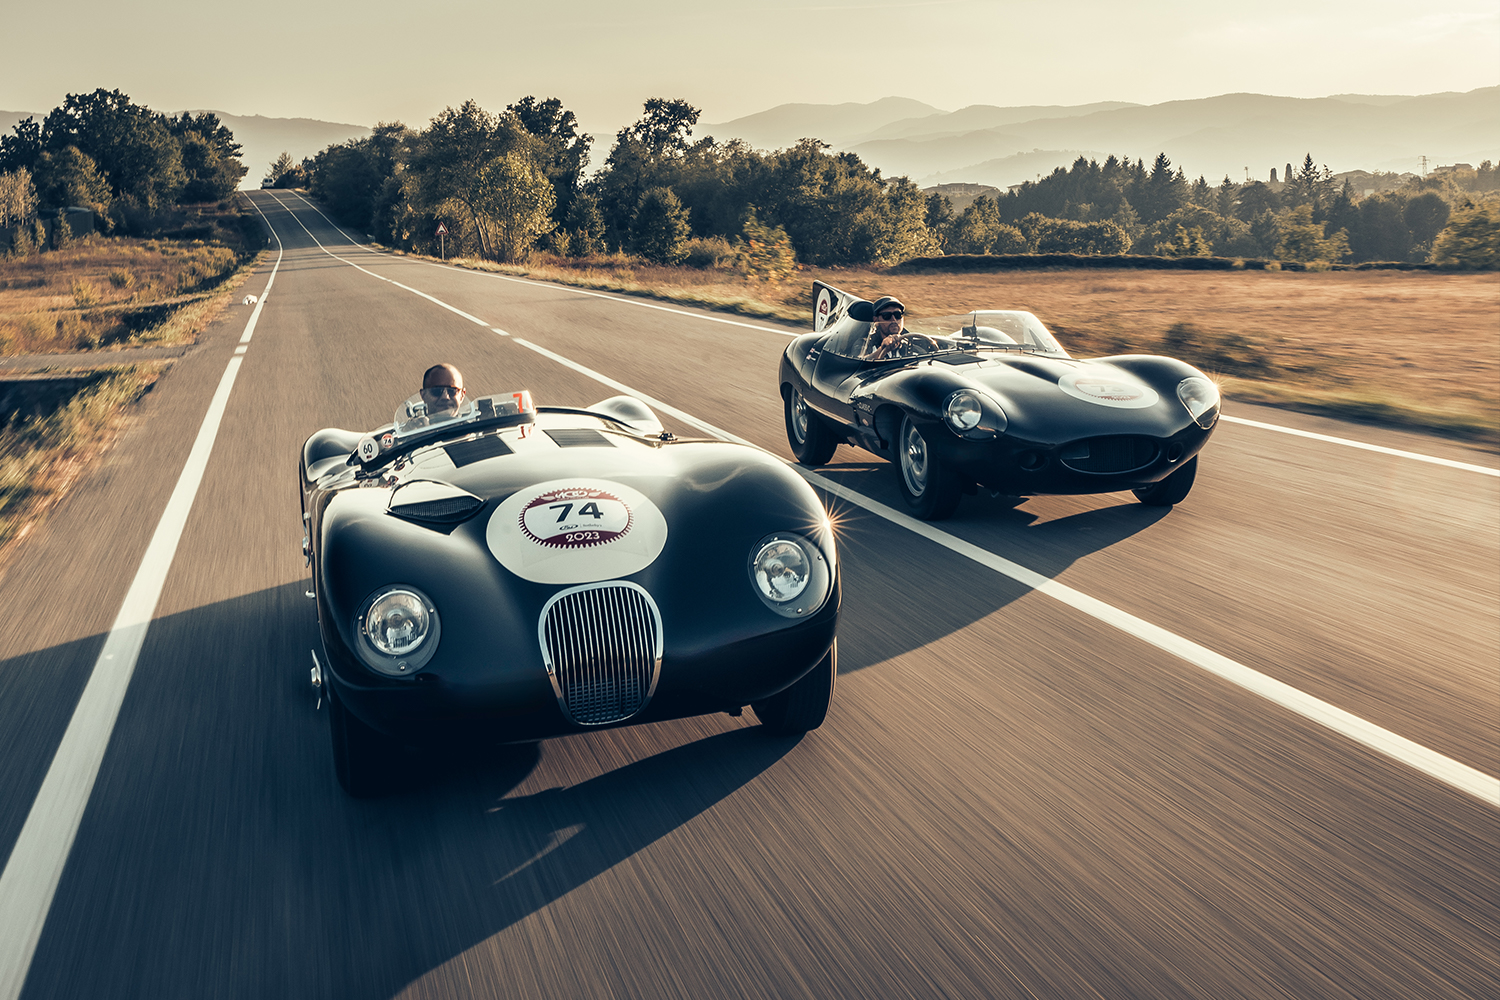 Jaguar Classic C-type and D-type driving on a rural road in Italy